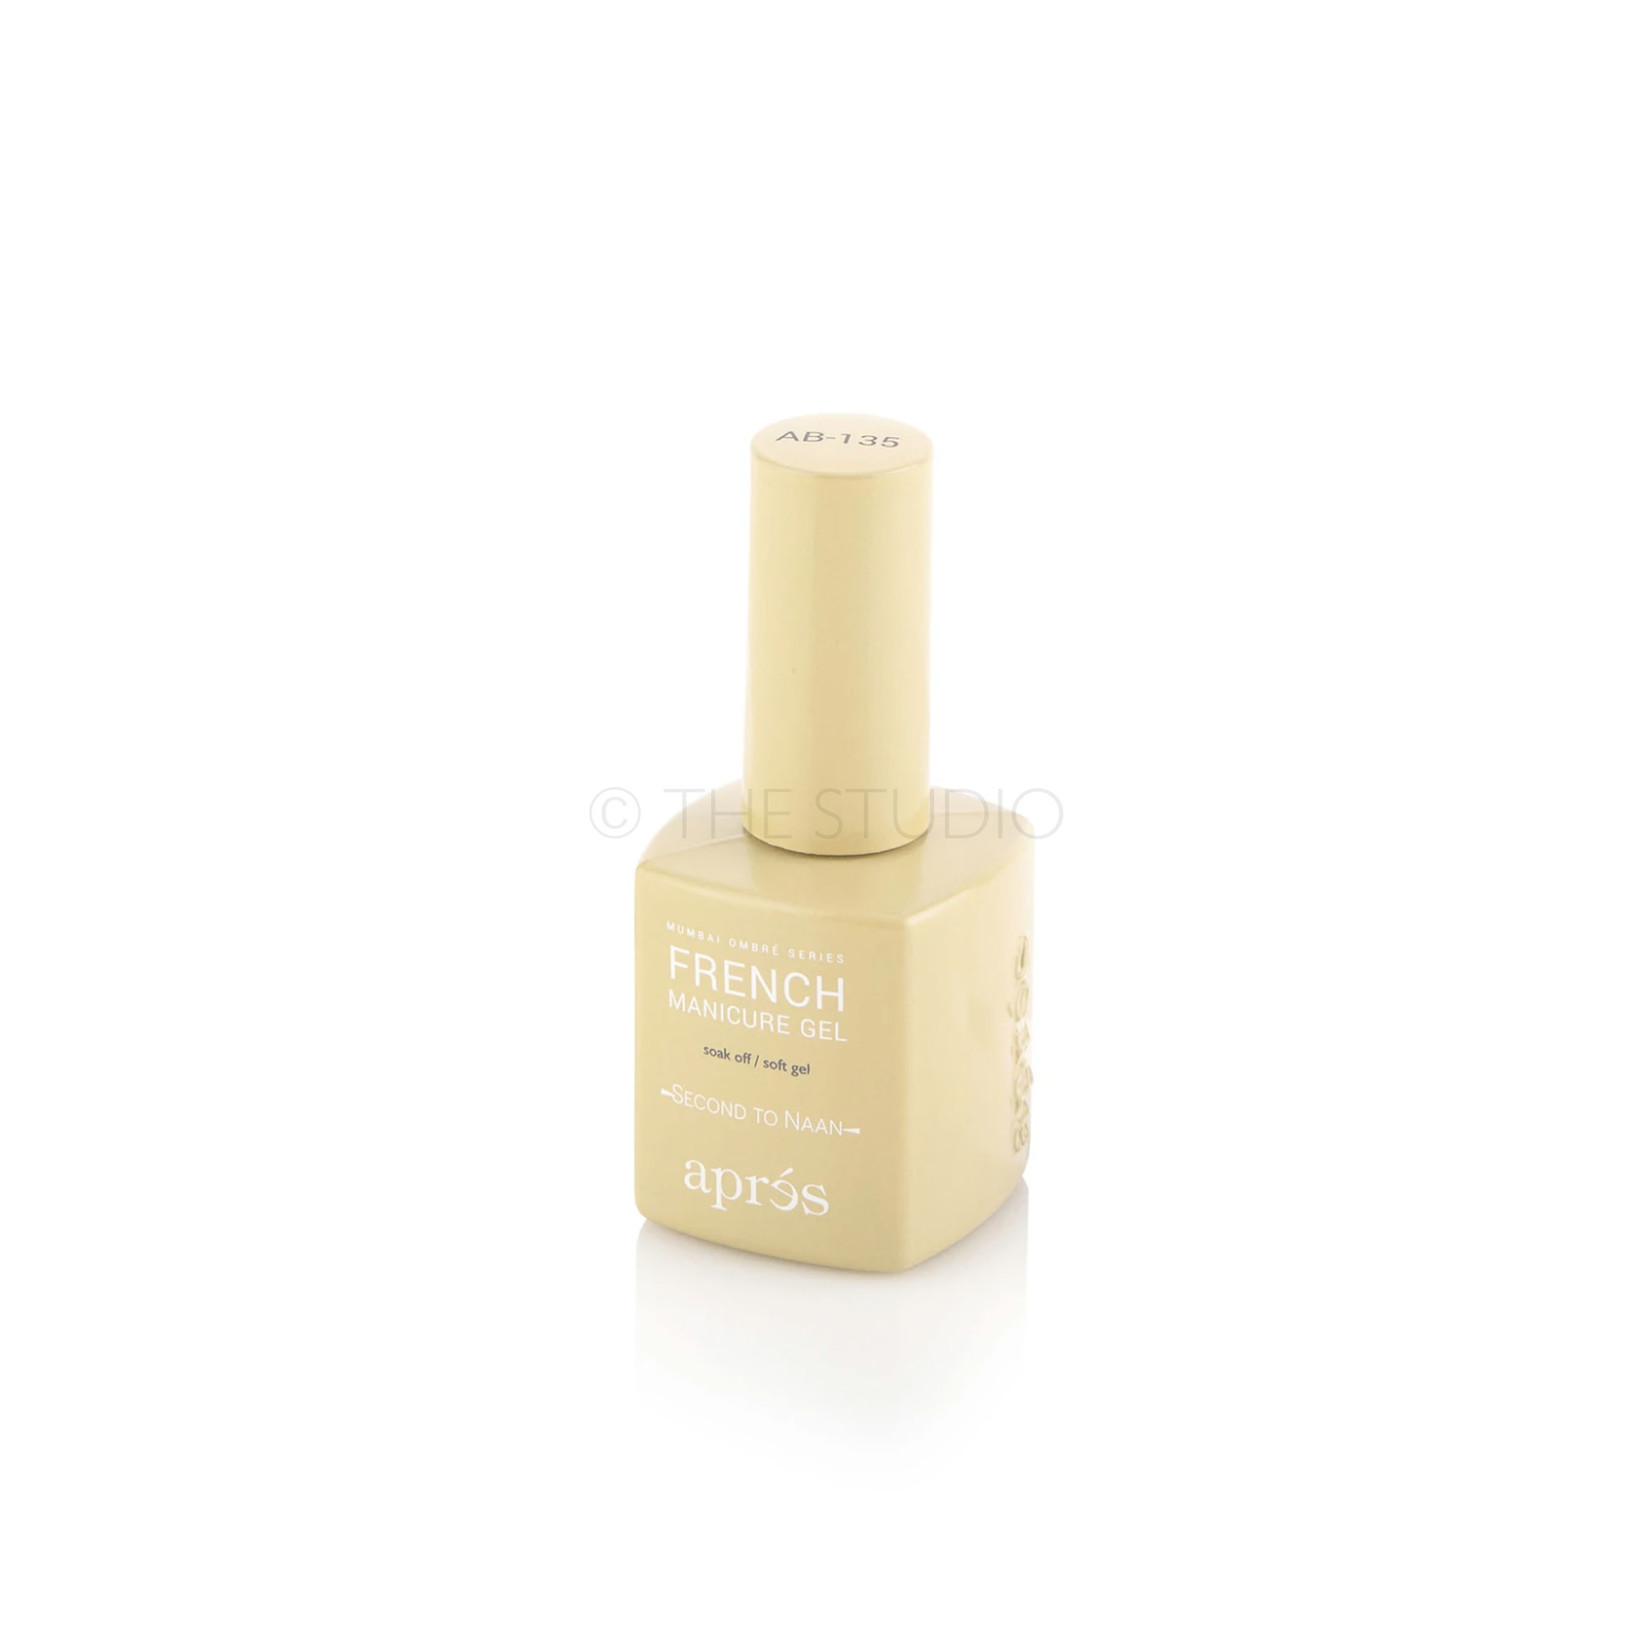 Apres Apres - French Manicure Gel - 135 Second to Naan - 0.5 oz